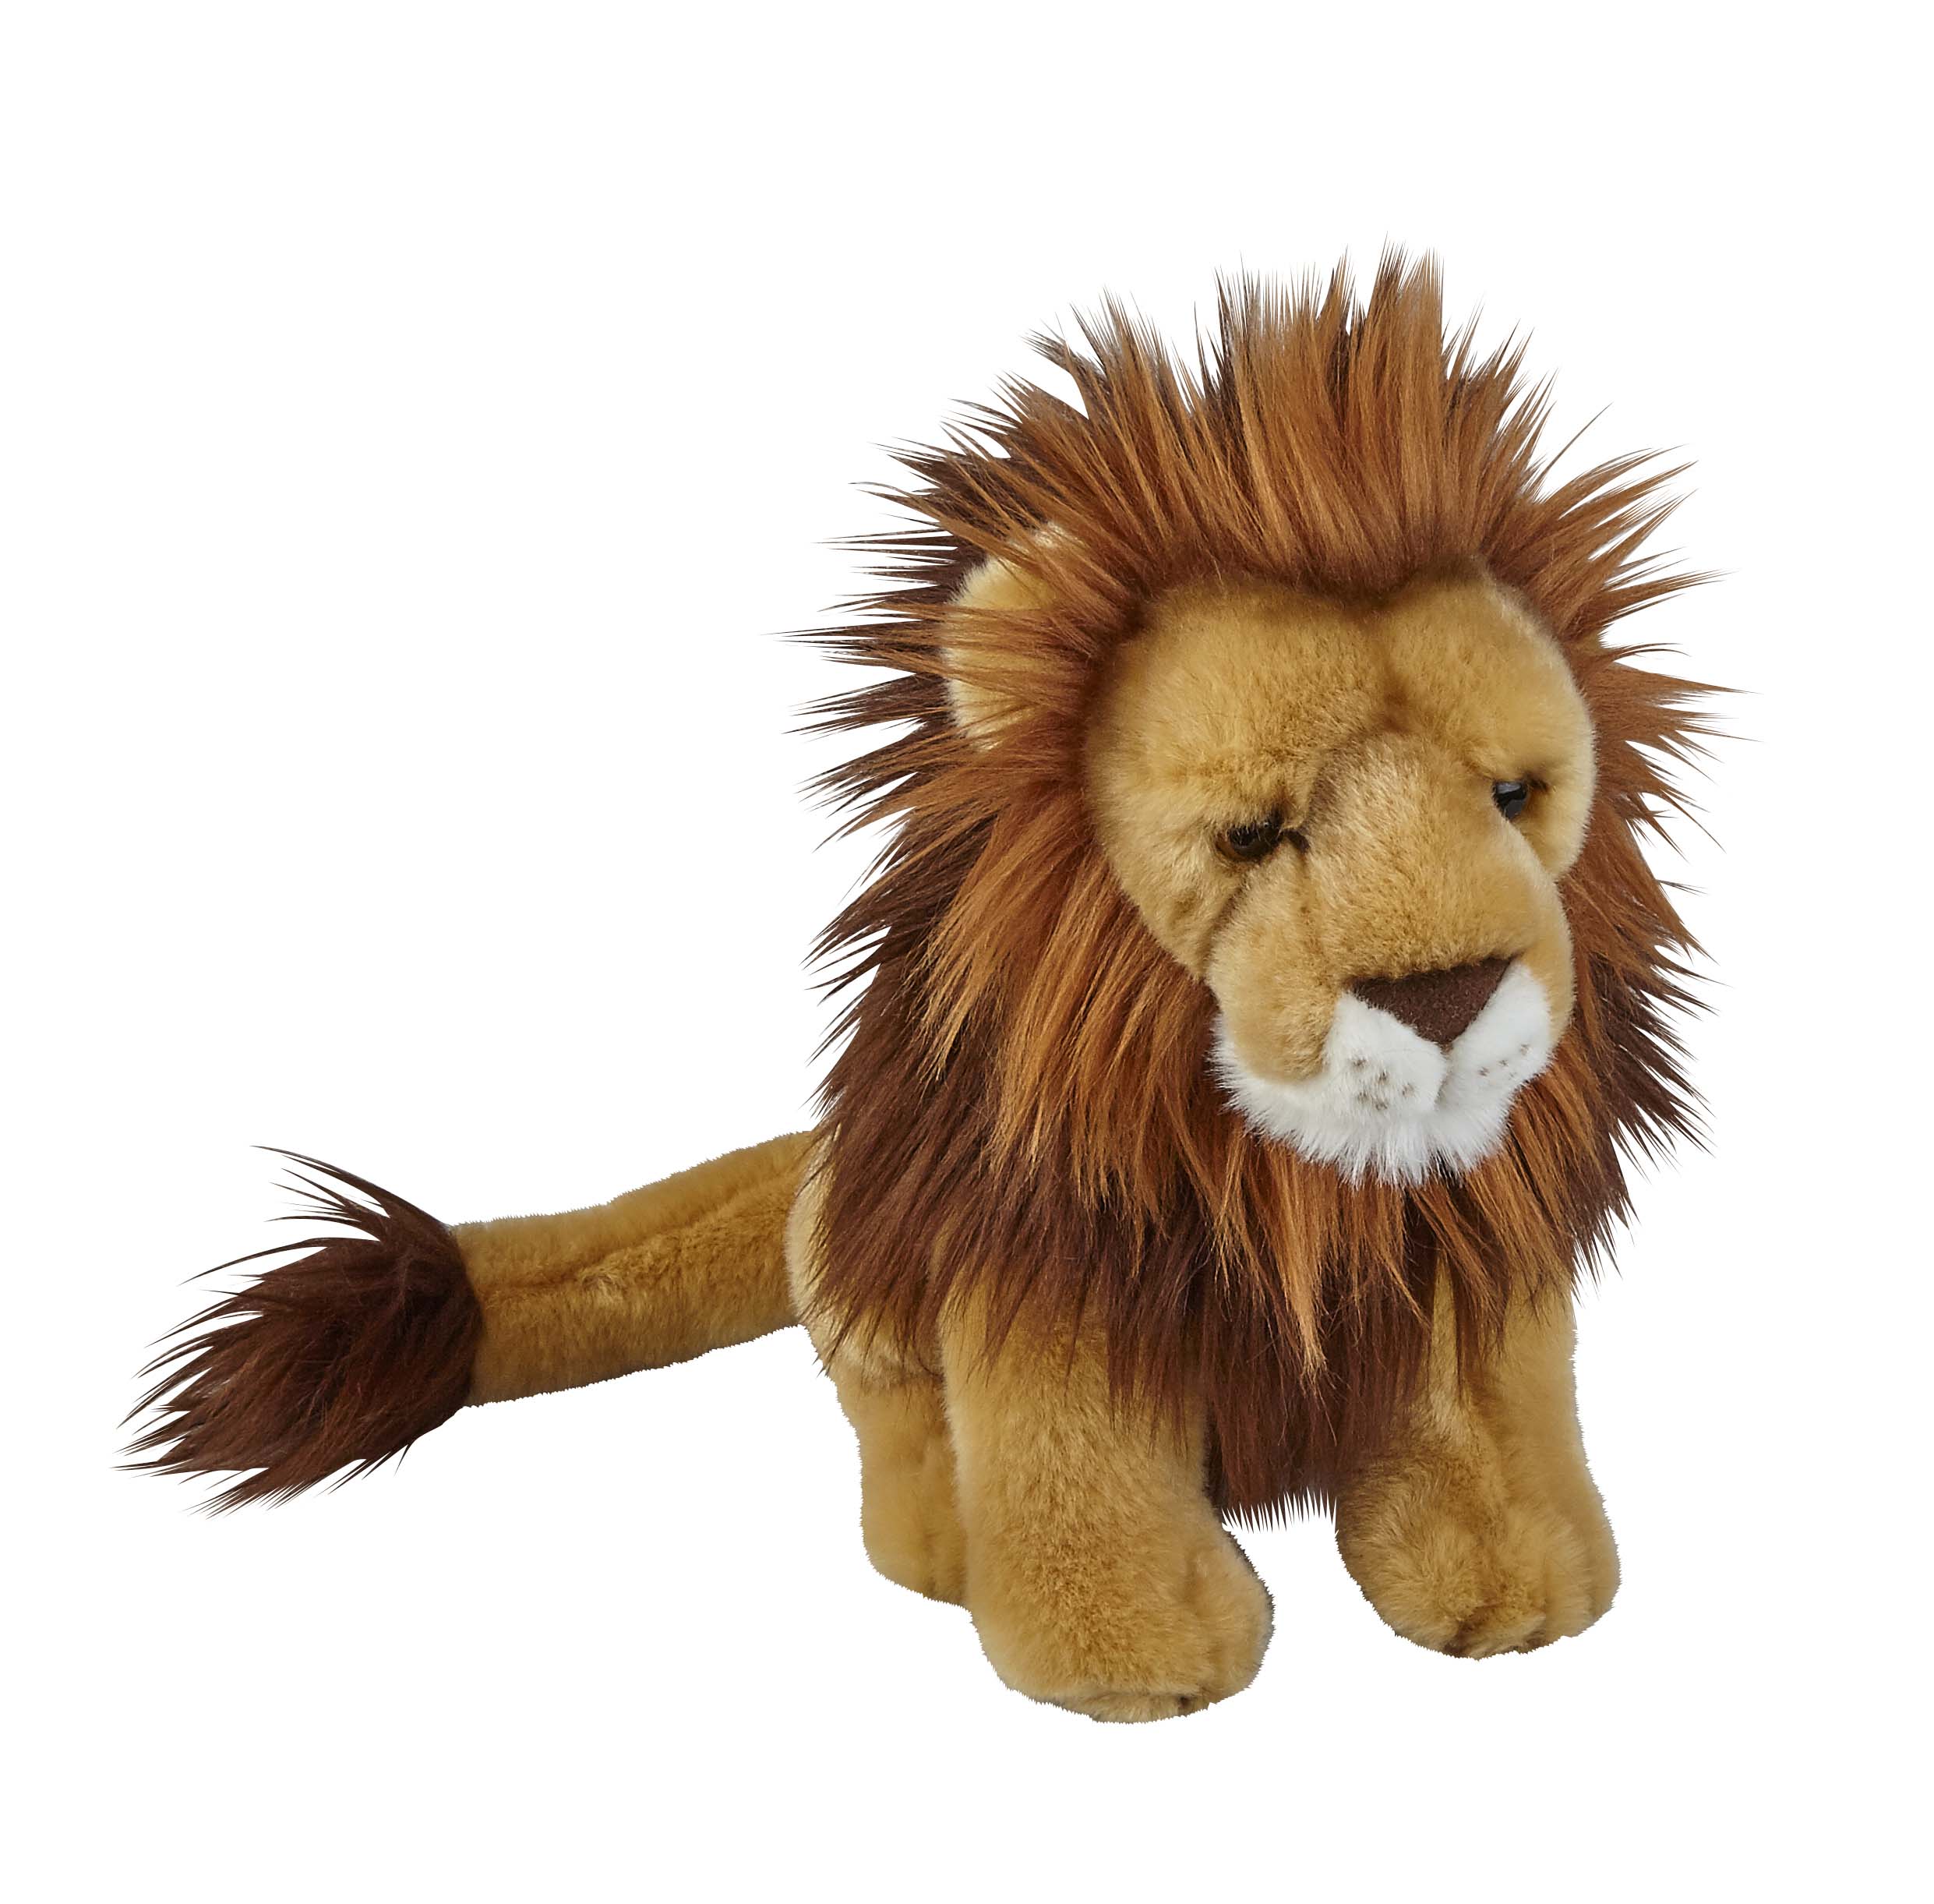 Bespoke Suppliers of Toy Lion for Museums